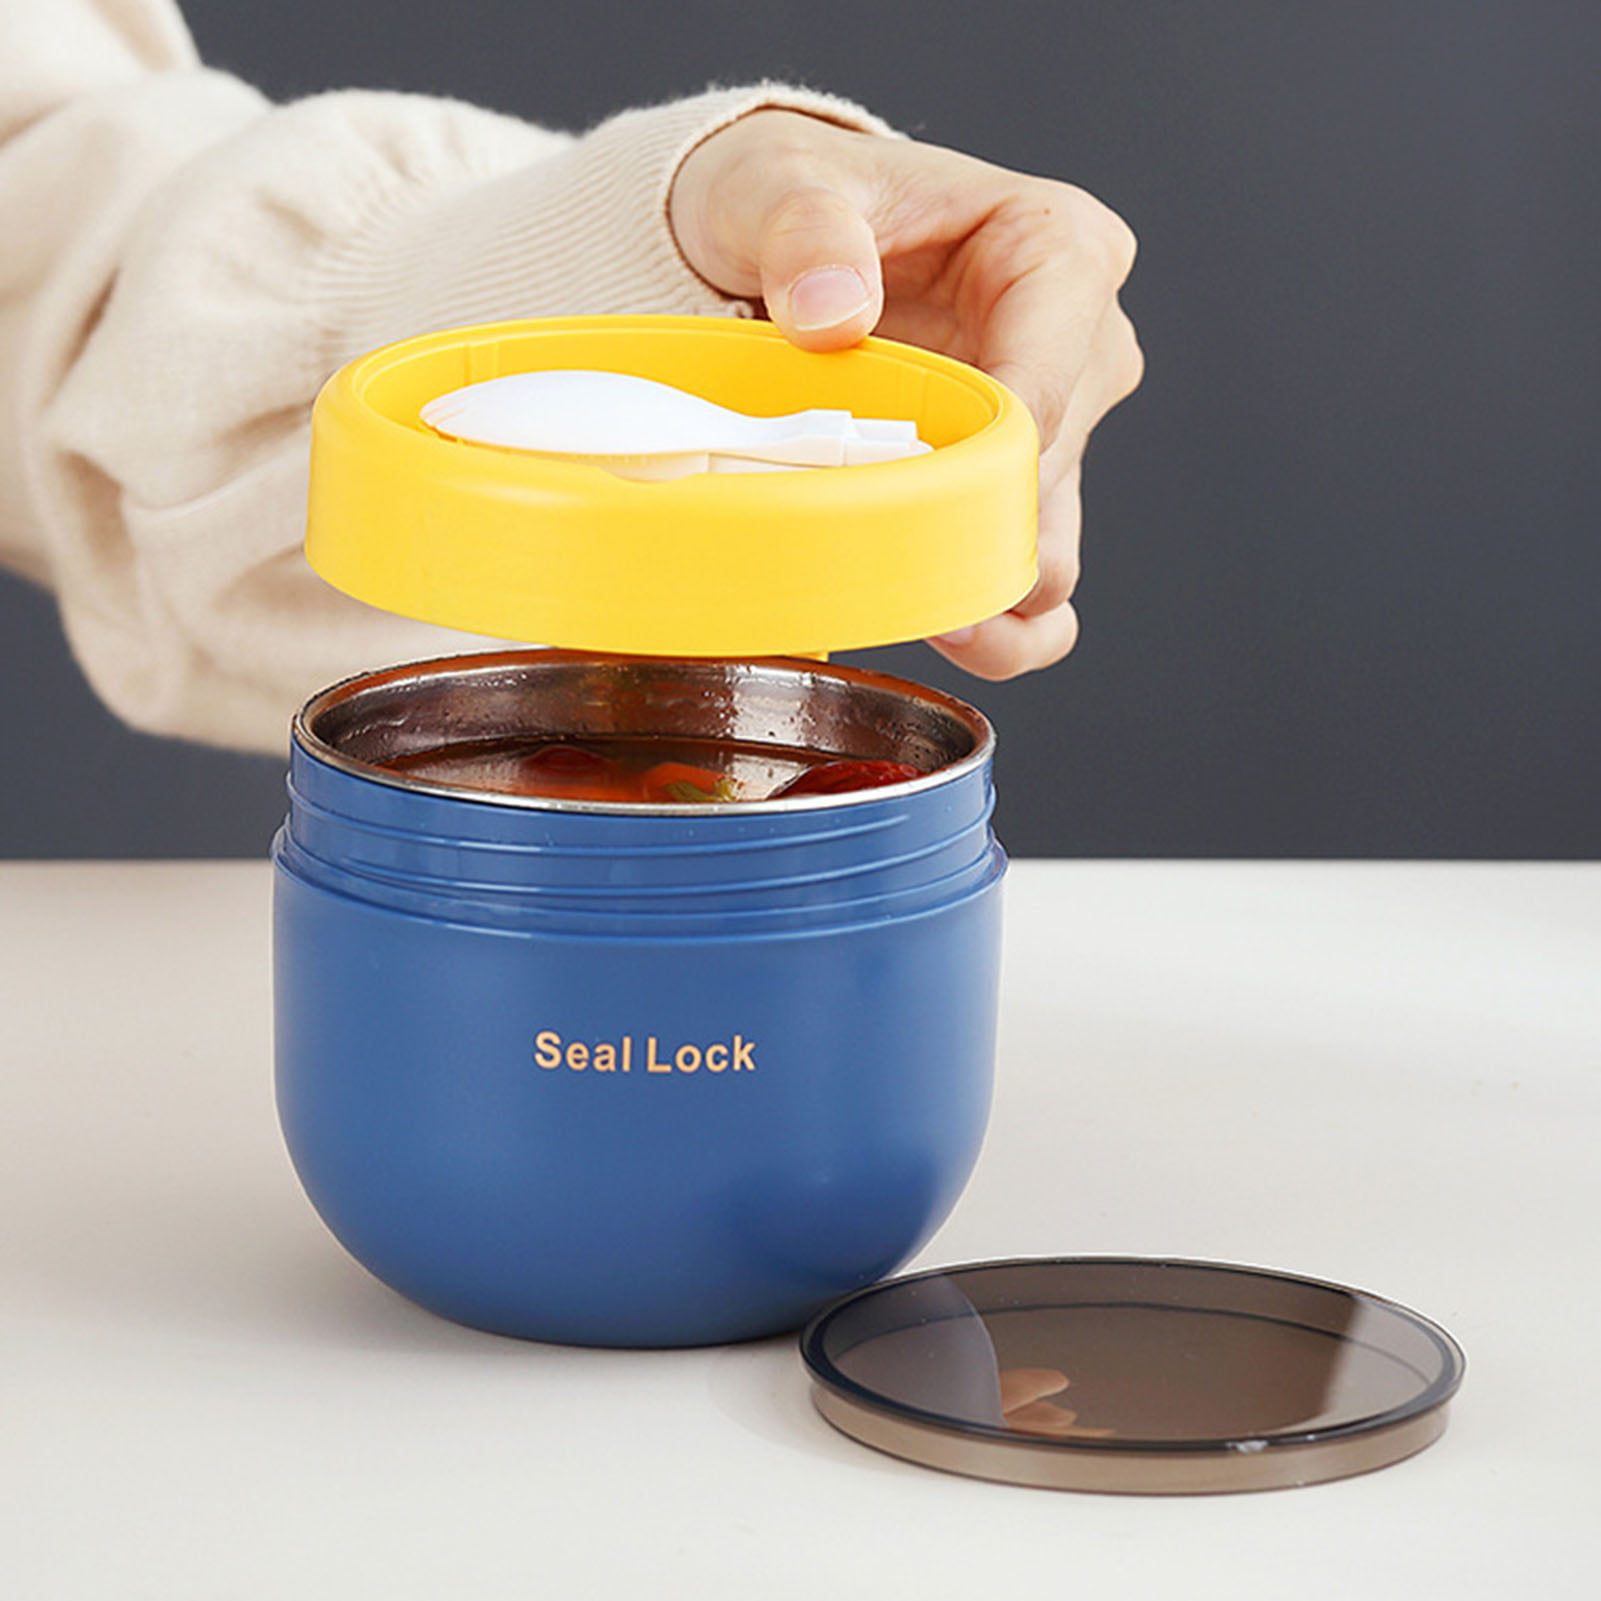 Hotbest 480ml Leak Proof Thermal Insulated Food Jar with Foldable Spoon, Lunch Containers Soup Cup Reusable Thermal Food Storage Container for Kids